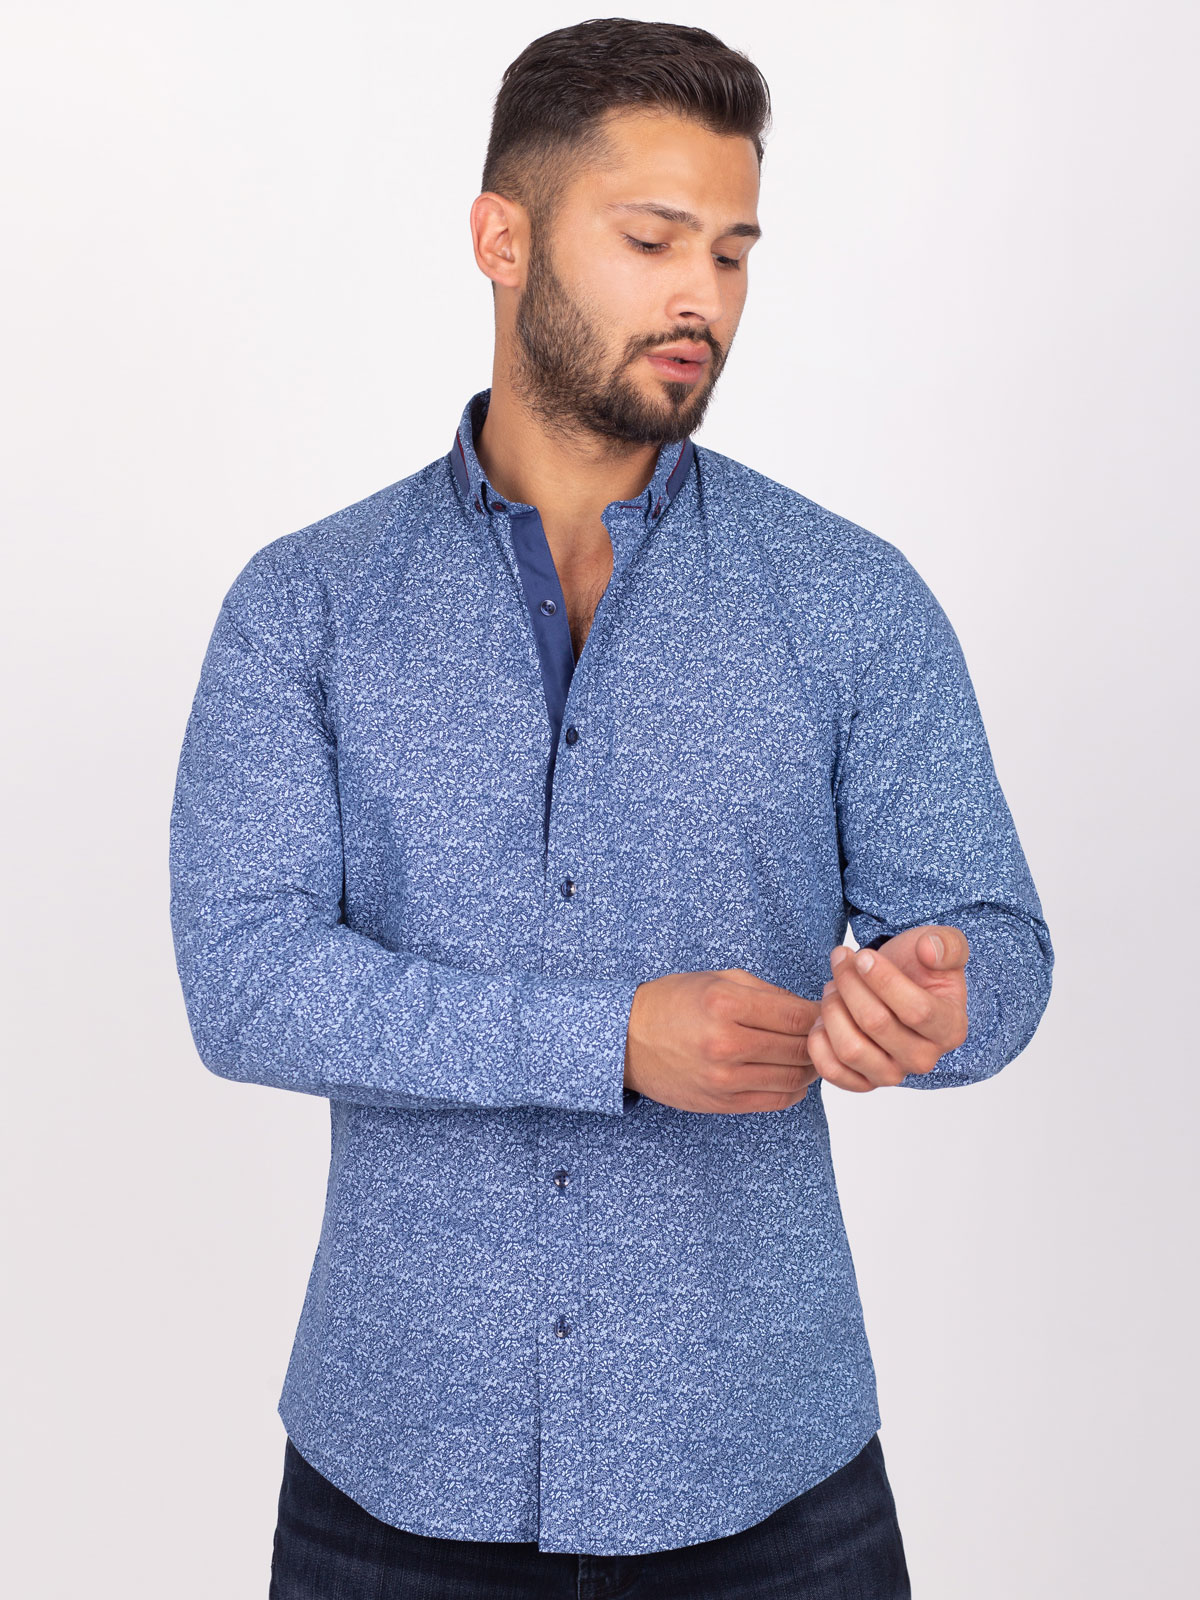 Shirt with blue floral panel collar - 21507 € 30.93 img3